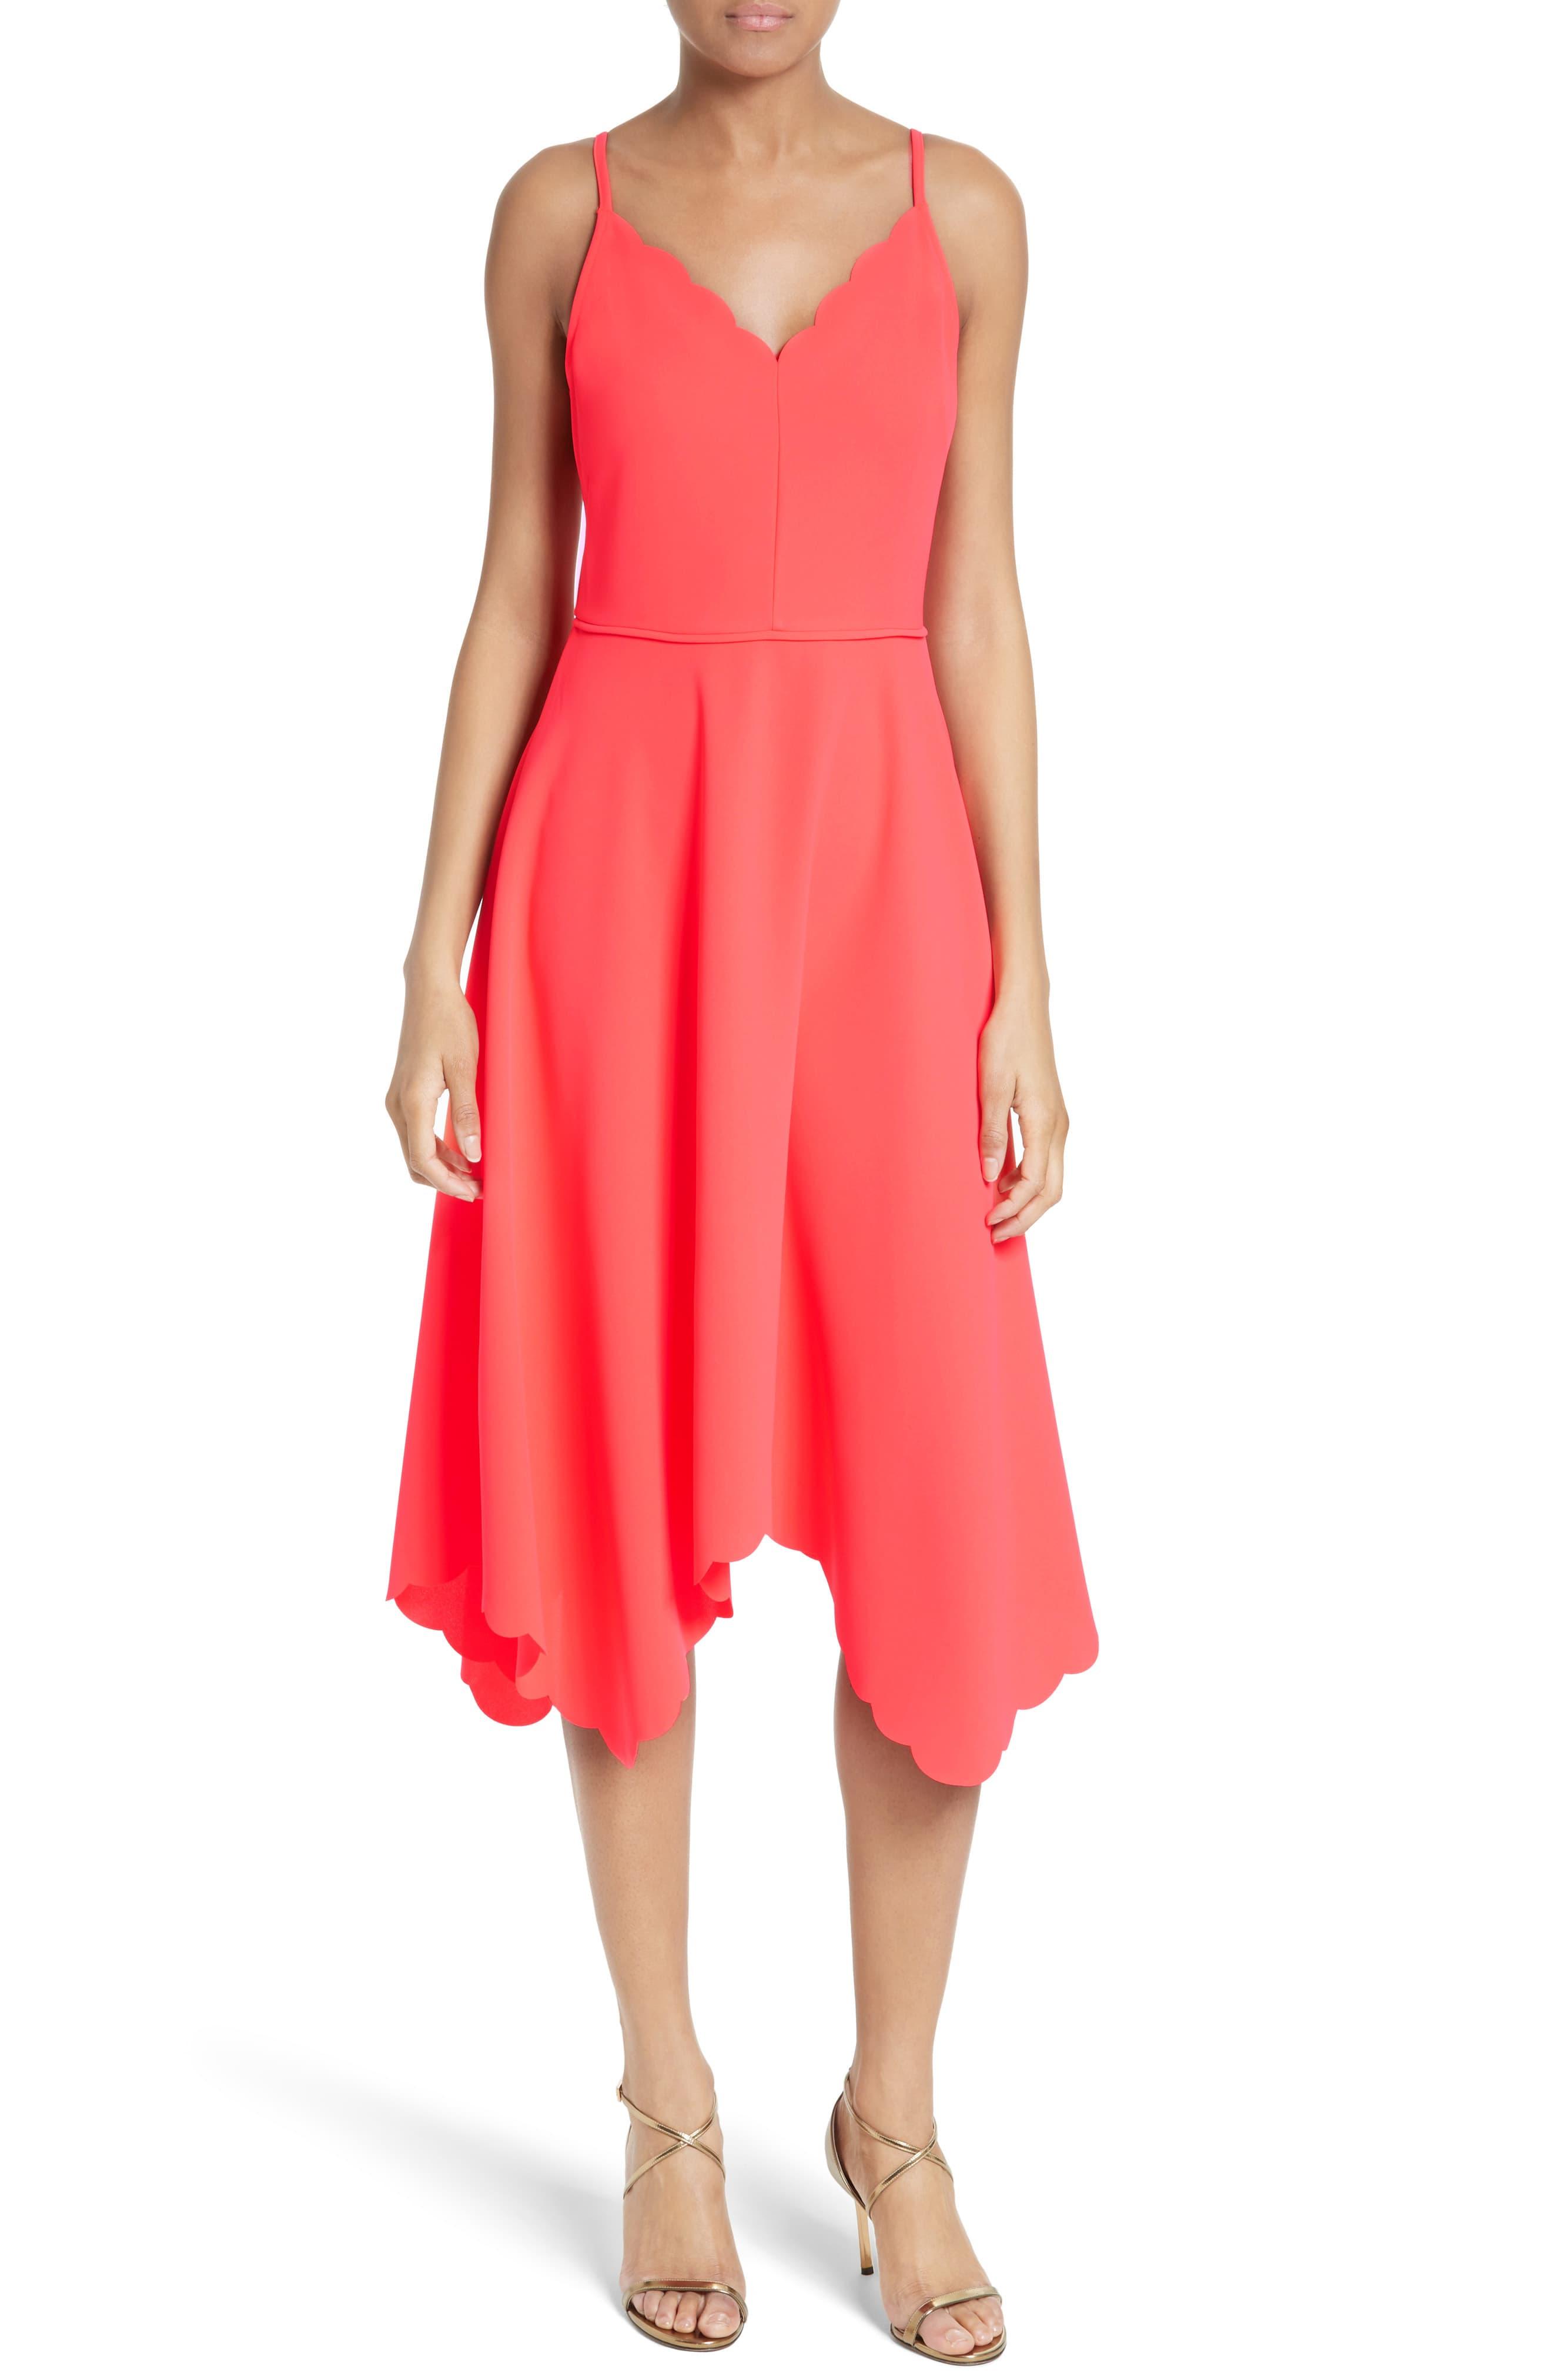 Ted Baker Simbah Scallop Handkerchief Hem Dress in Coral (Pink) - Lyst